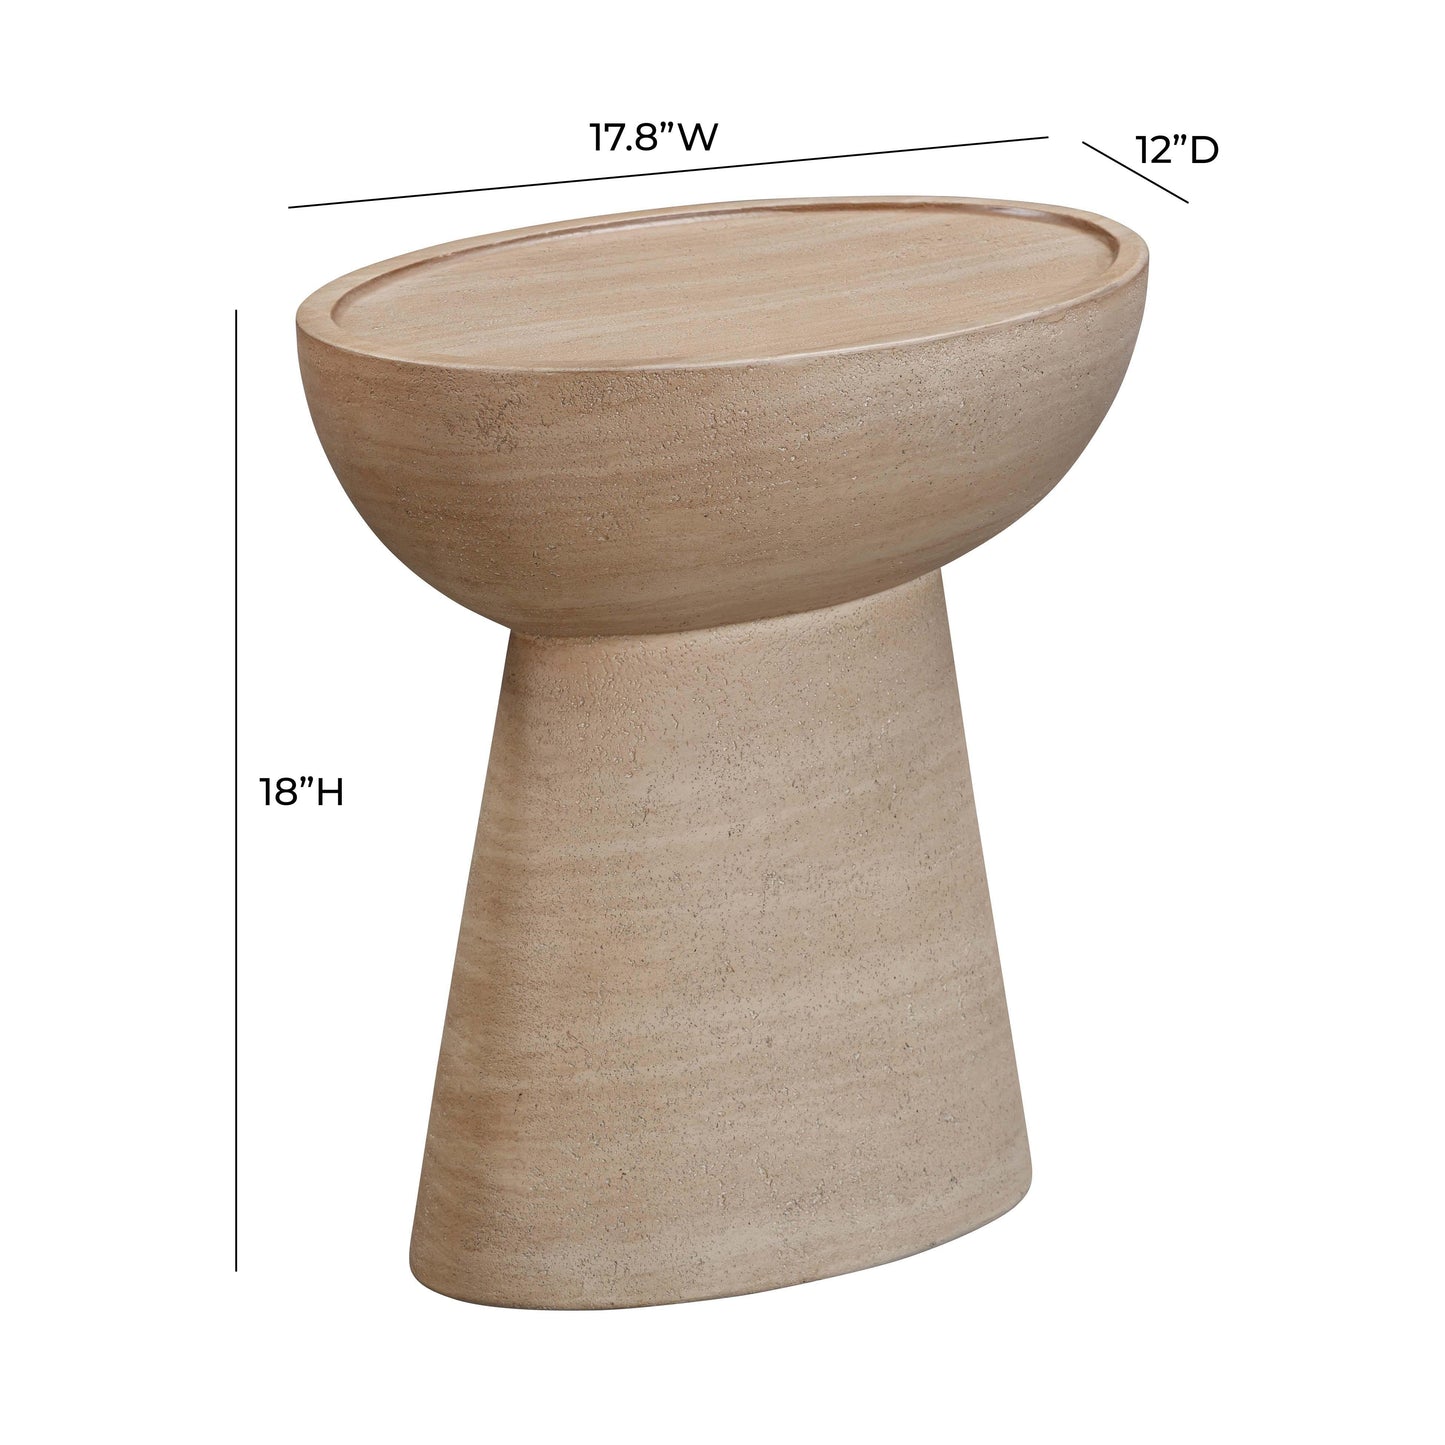 wafa textured faux travertine indoor / outdoor side table